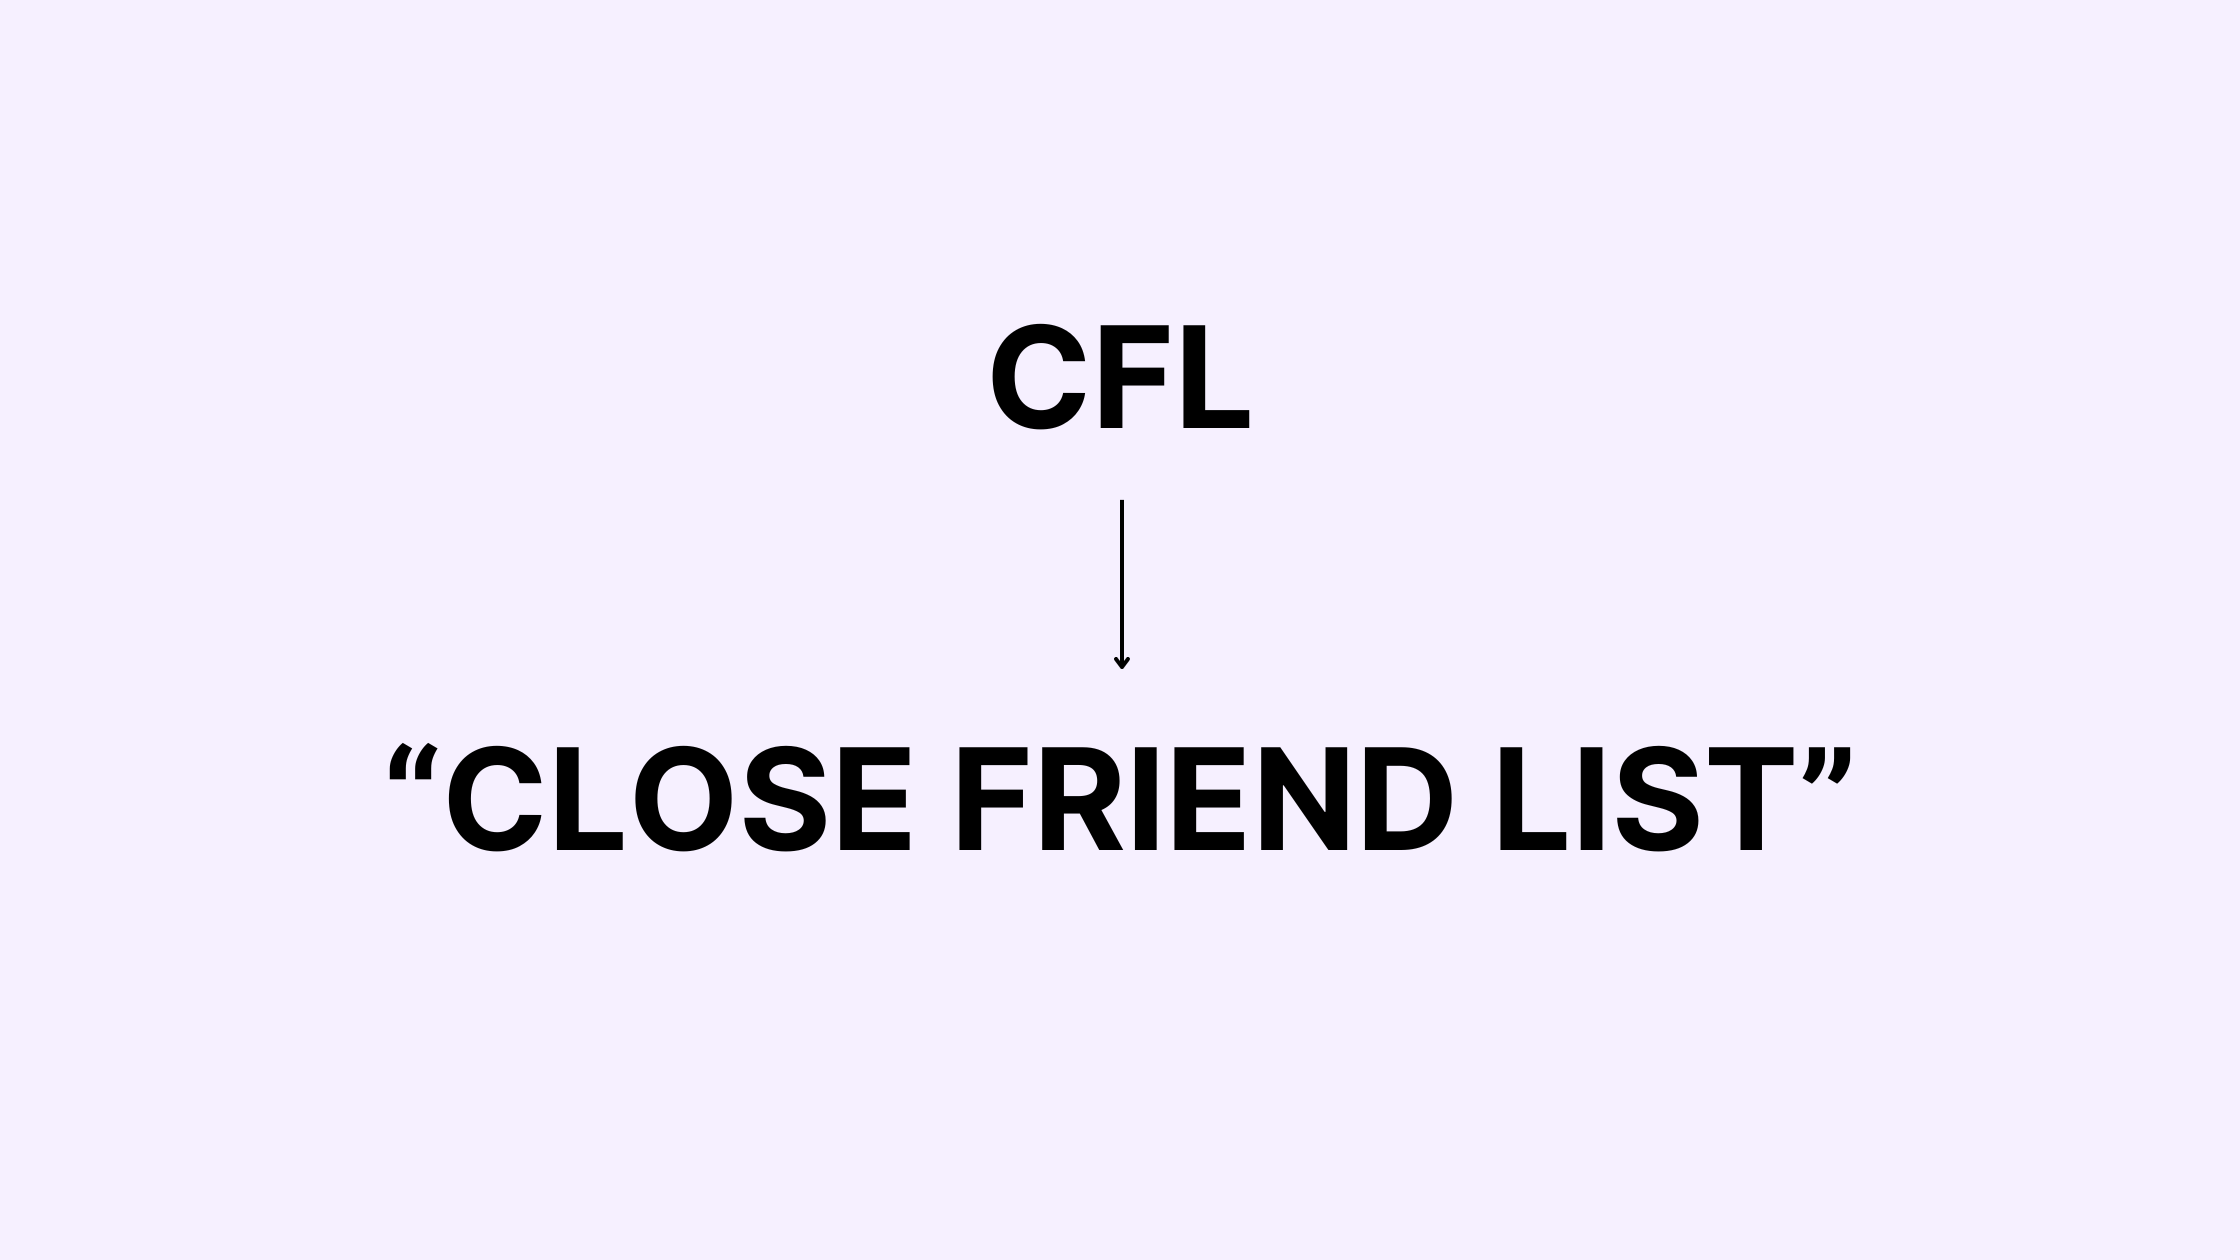 What does CFL mean on Instagram